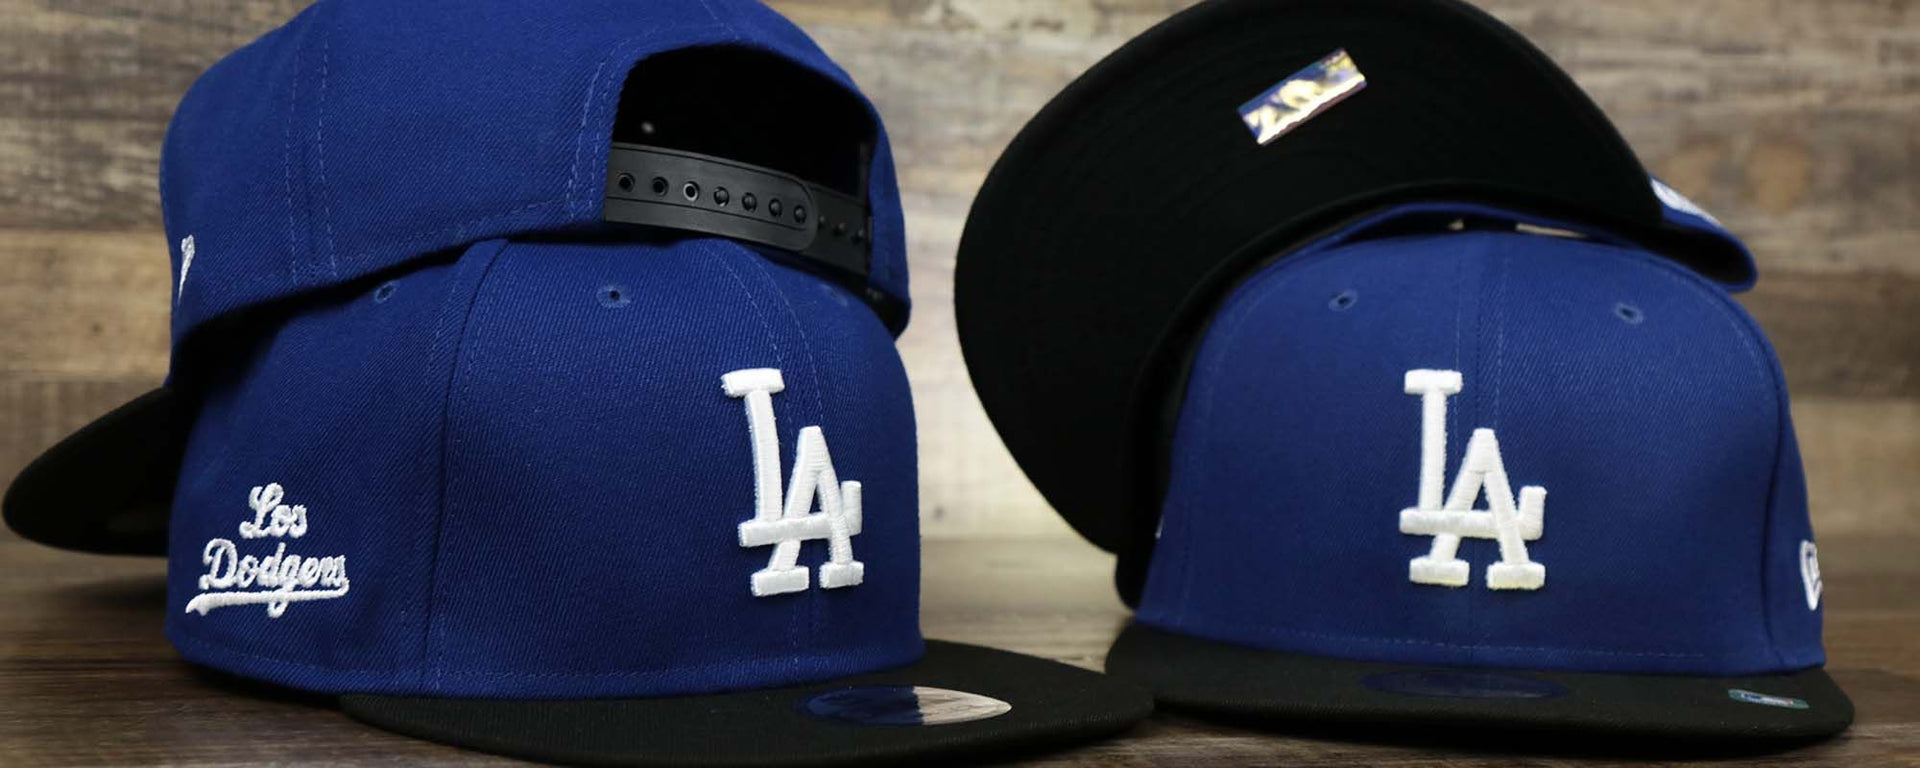 Custom City Connect 2022 Hats | MBL 2022 City Connect 9Fiftys | Fitted Hats from City Connect 2022